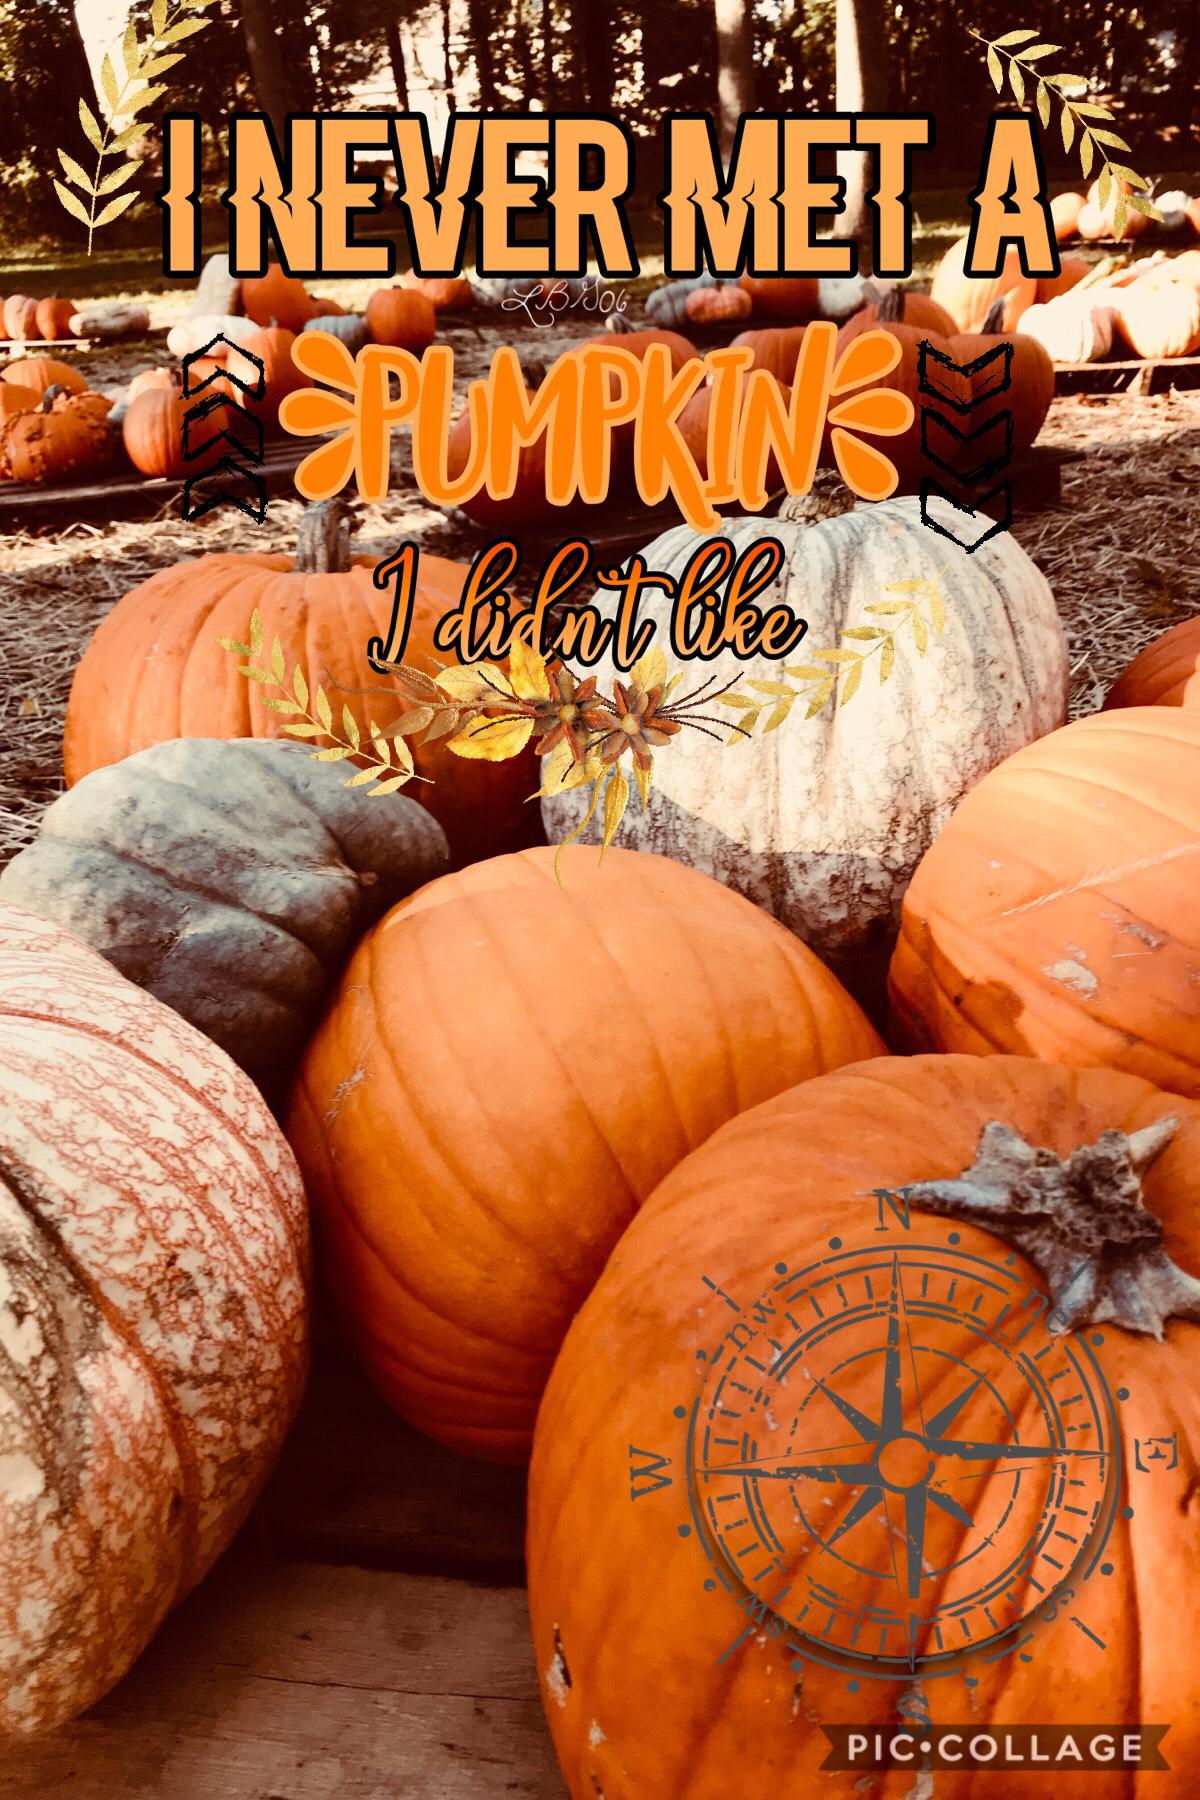 🎃TAP!!🎃 
HEY! I decided to post something today 💕
I took this picture! You like it? If u wanna use it look in remixes!
QOTD: what is ur favorite part about fall?
AOTD: crunchy leaves!! 🍂🍁🍂🍁
XOXO CYA SOON 💕😘🎃🍂